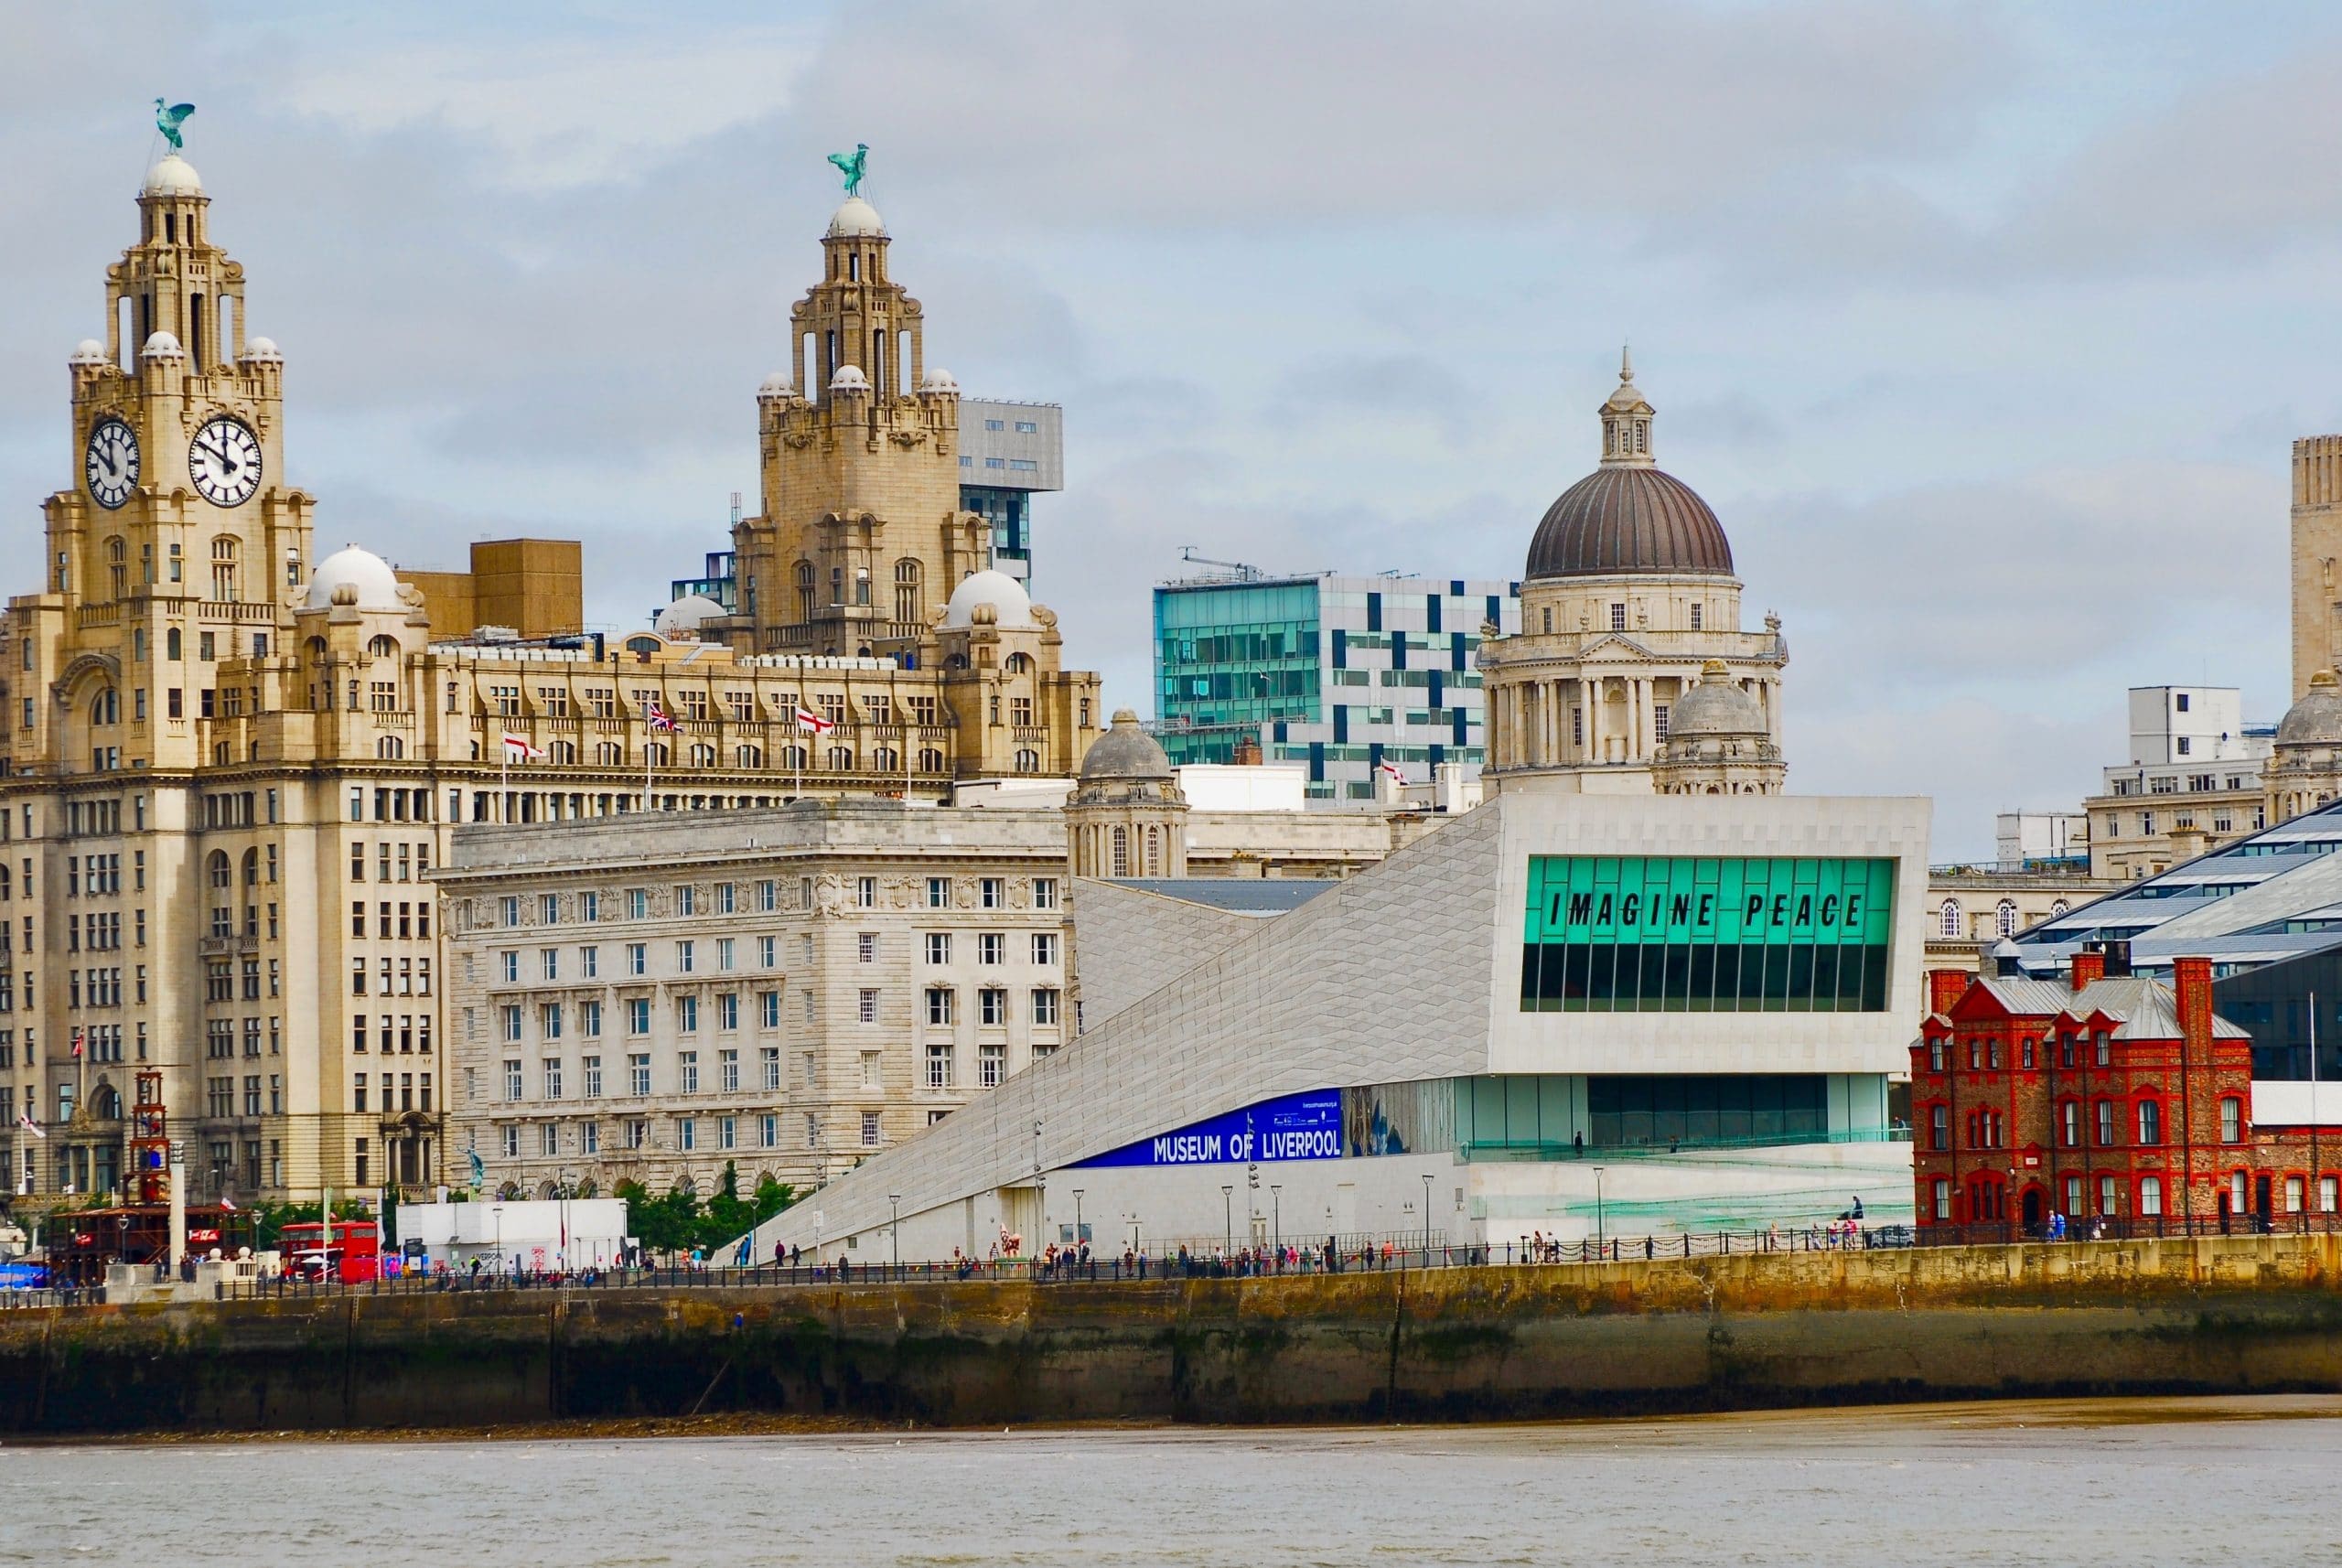 Liverpool waterfront on a cloudy day with the Liver building and Museum of Liverpool in the background.